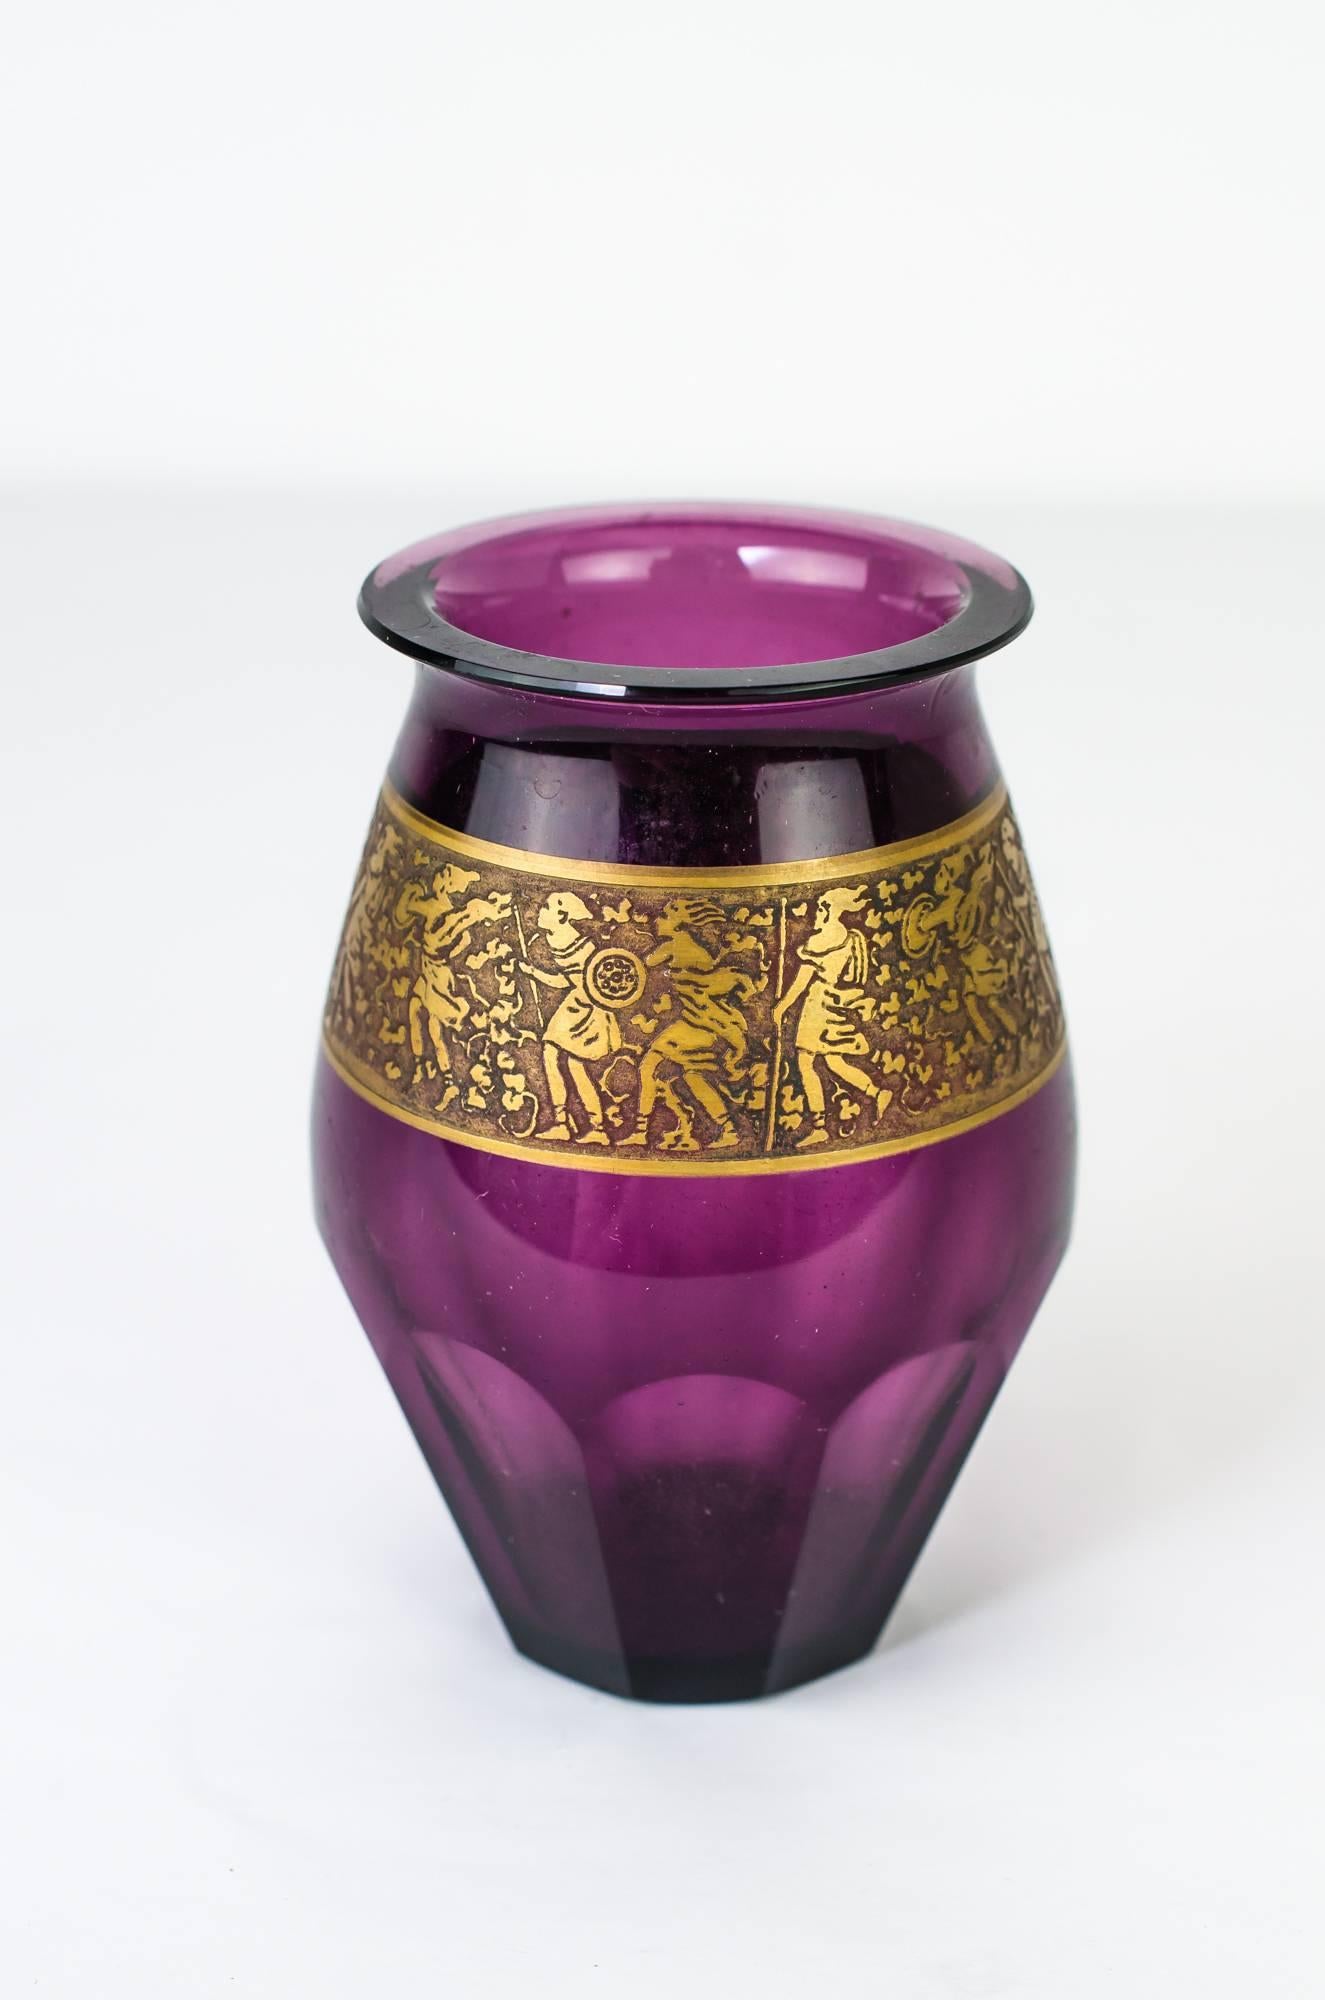 Beautiful vase by Moser Karlsbad
Glass with a gold trim, made circa 1900 in Karlsbad by Moser Glassworks.